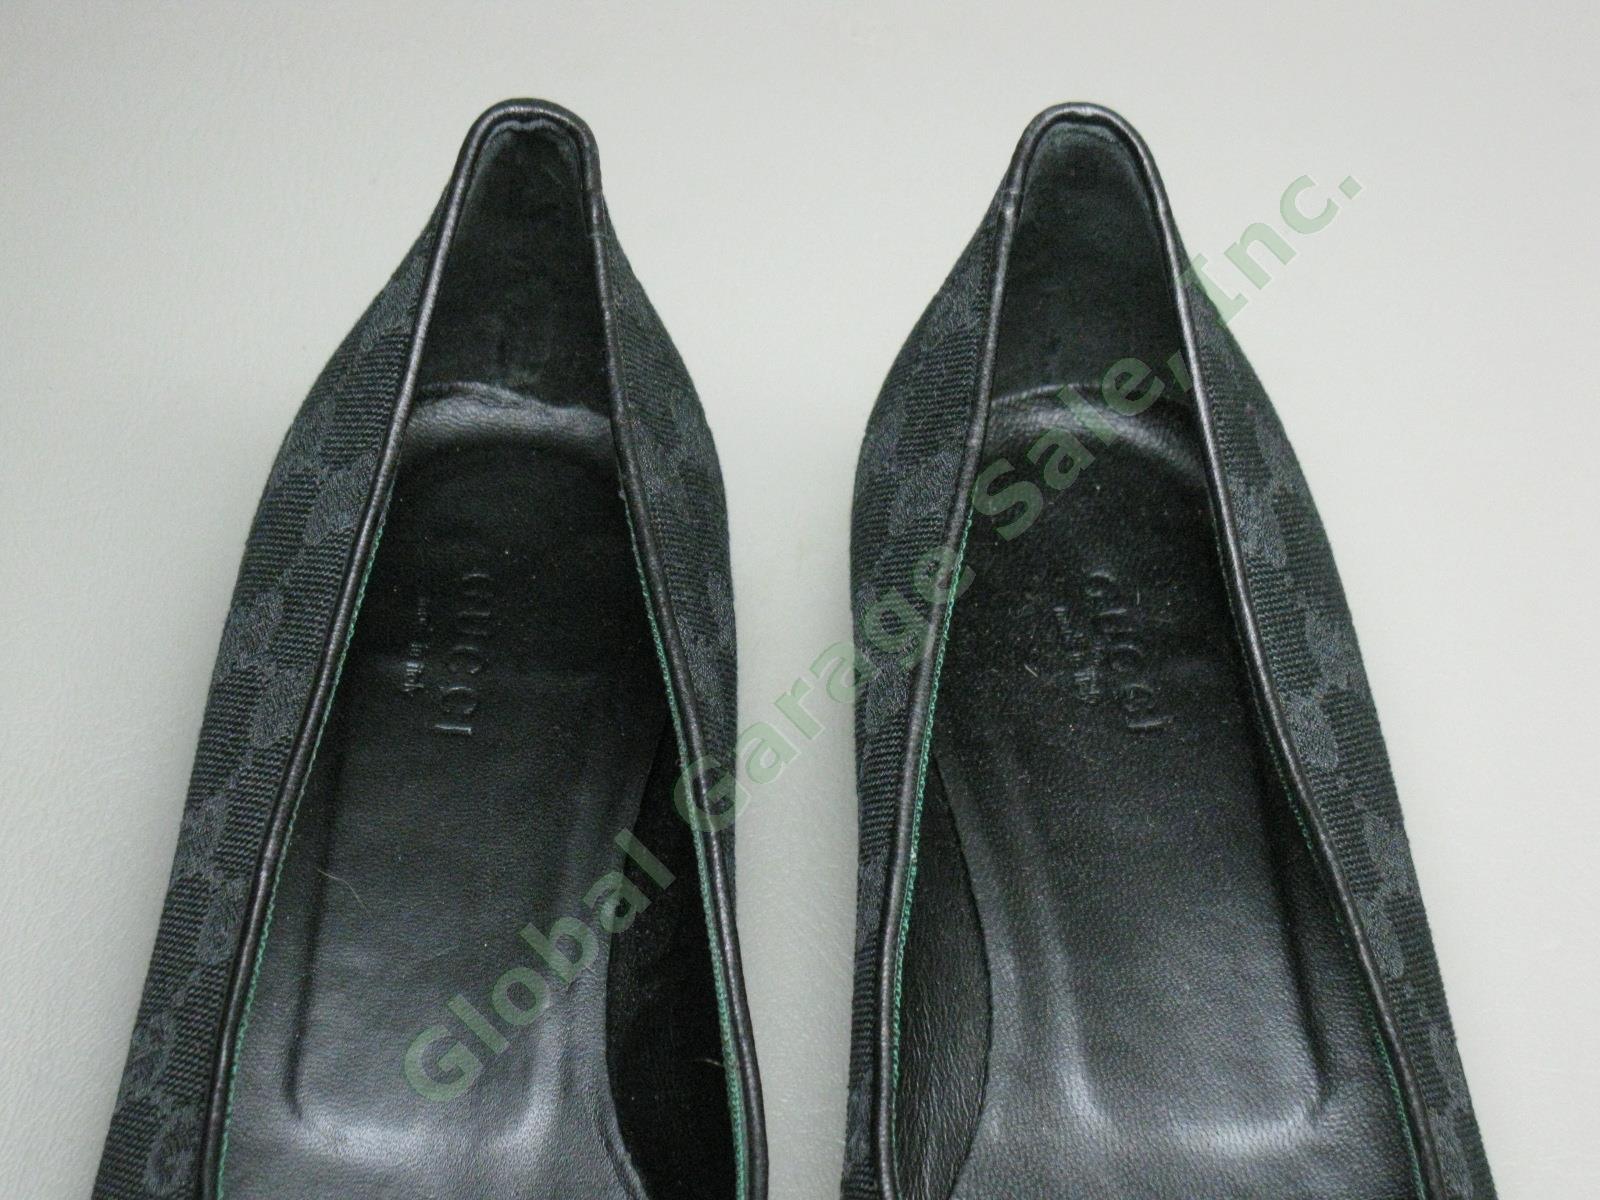 Womens Gucci Moca Tess S Cuoio Flats Size 7.5 Black One Owner With Box 161837 NR 8